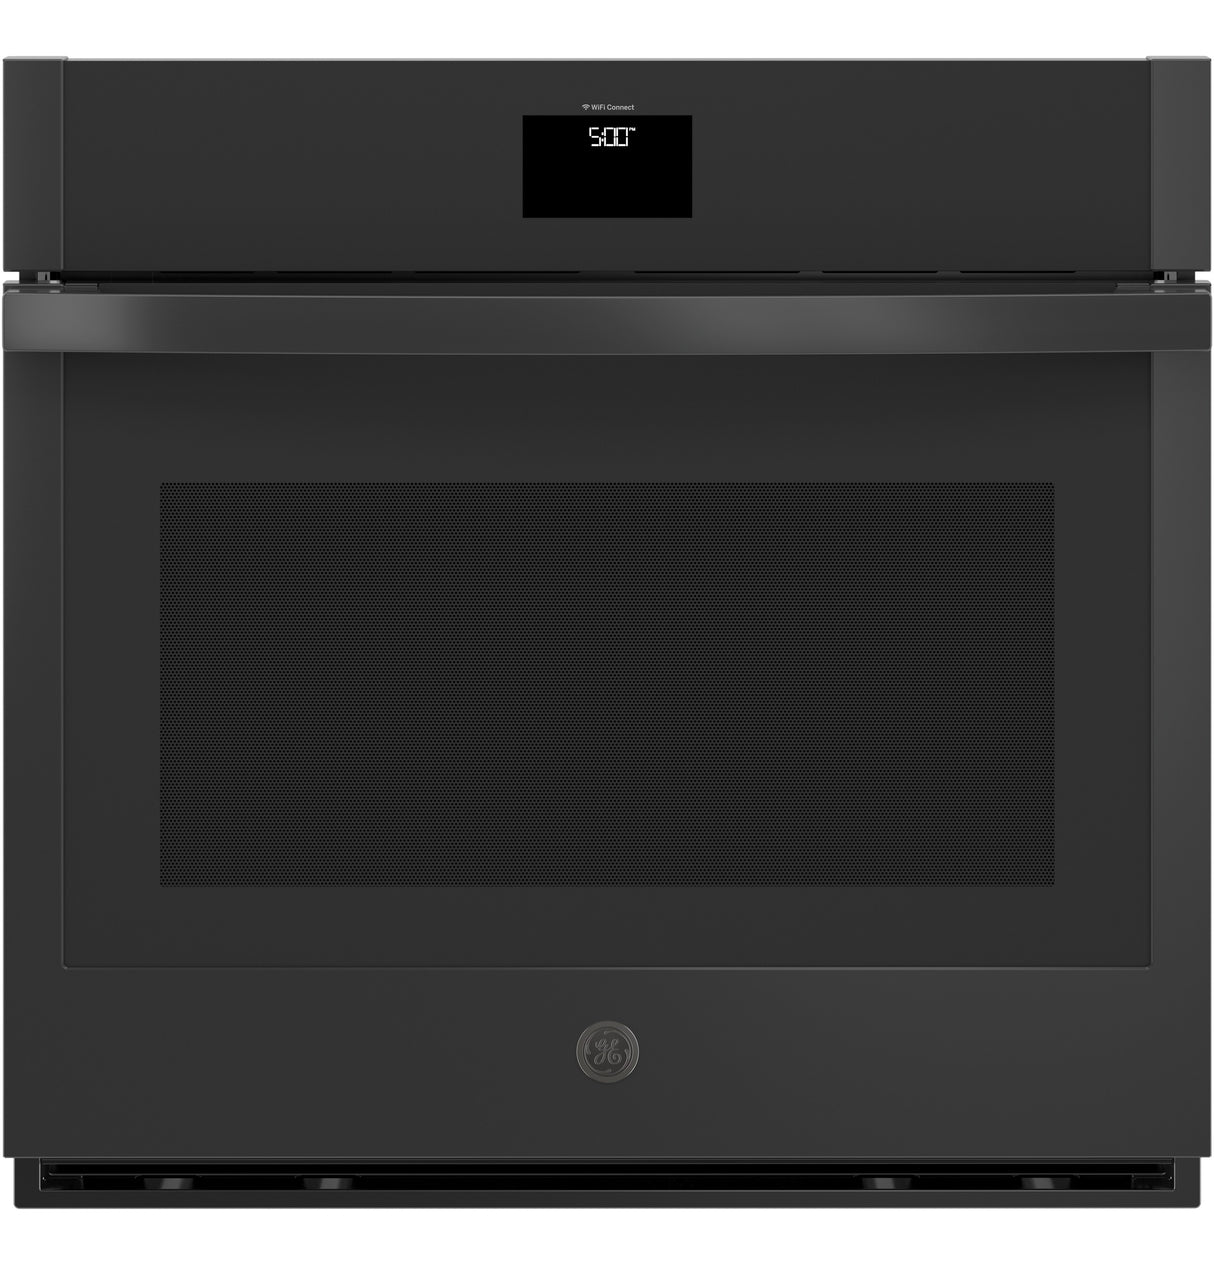 GE(R) 30" Smart Built-In Self-Clean Convection Single Wall Oven with Never Scrub Racks - (JTS5000DNBB)